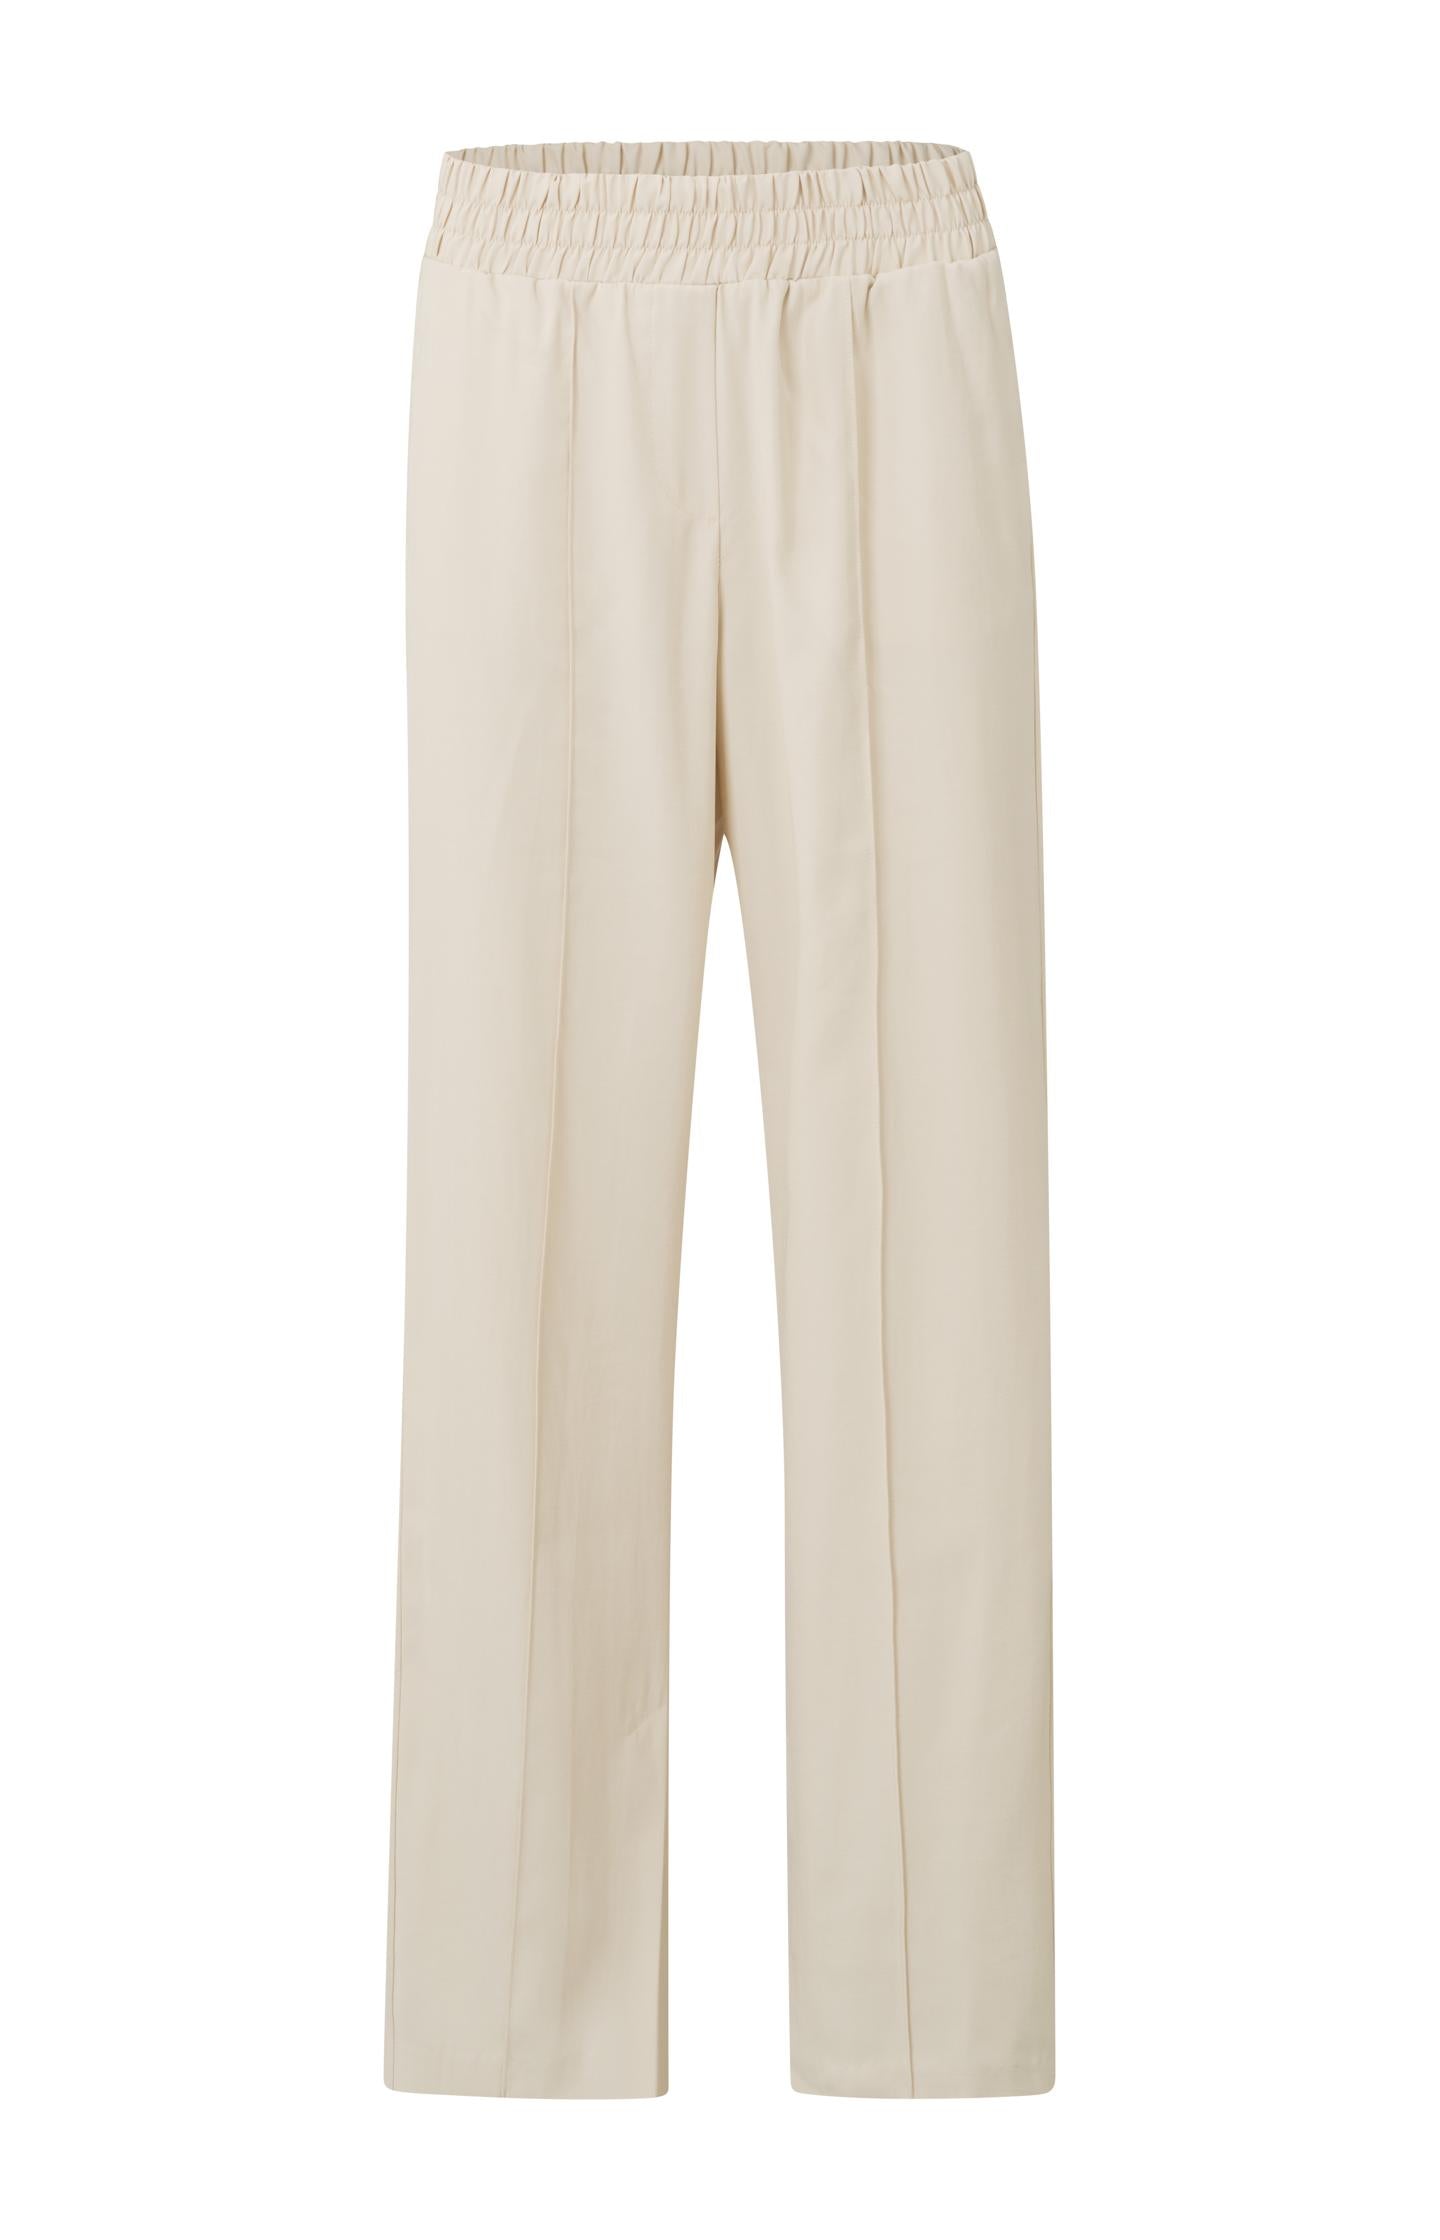 Wide leg trousers, side pockets, pintucks and a slit - Type: product